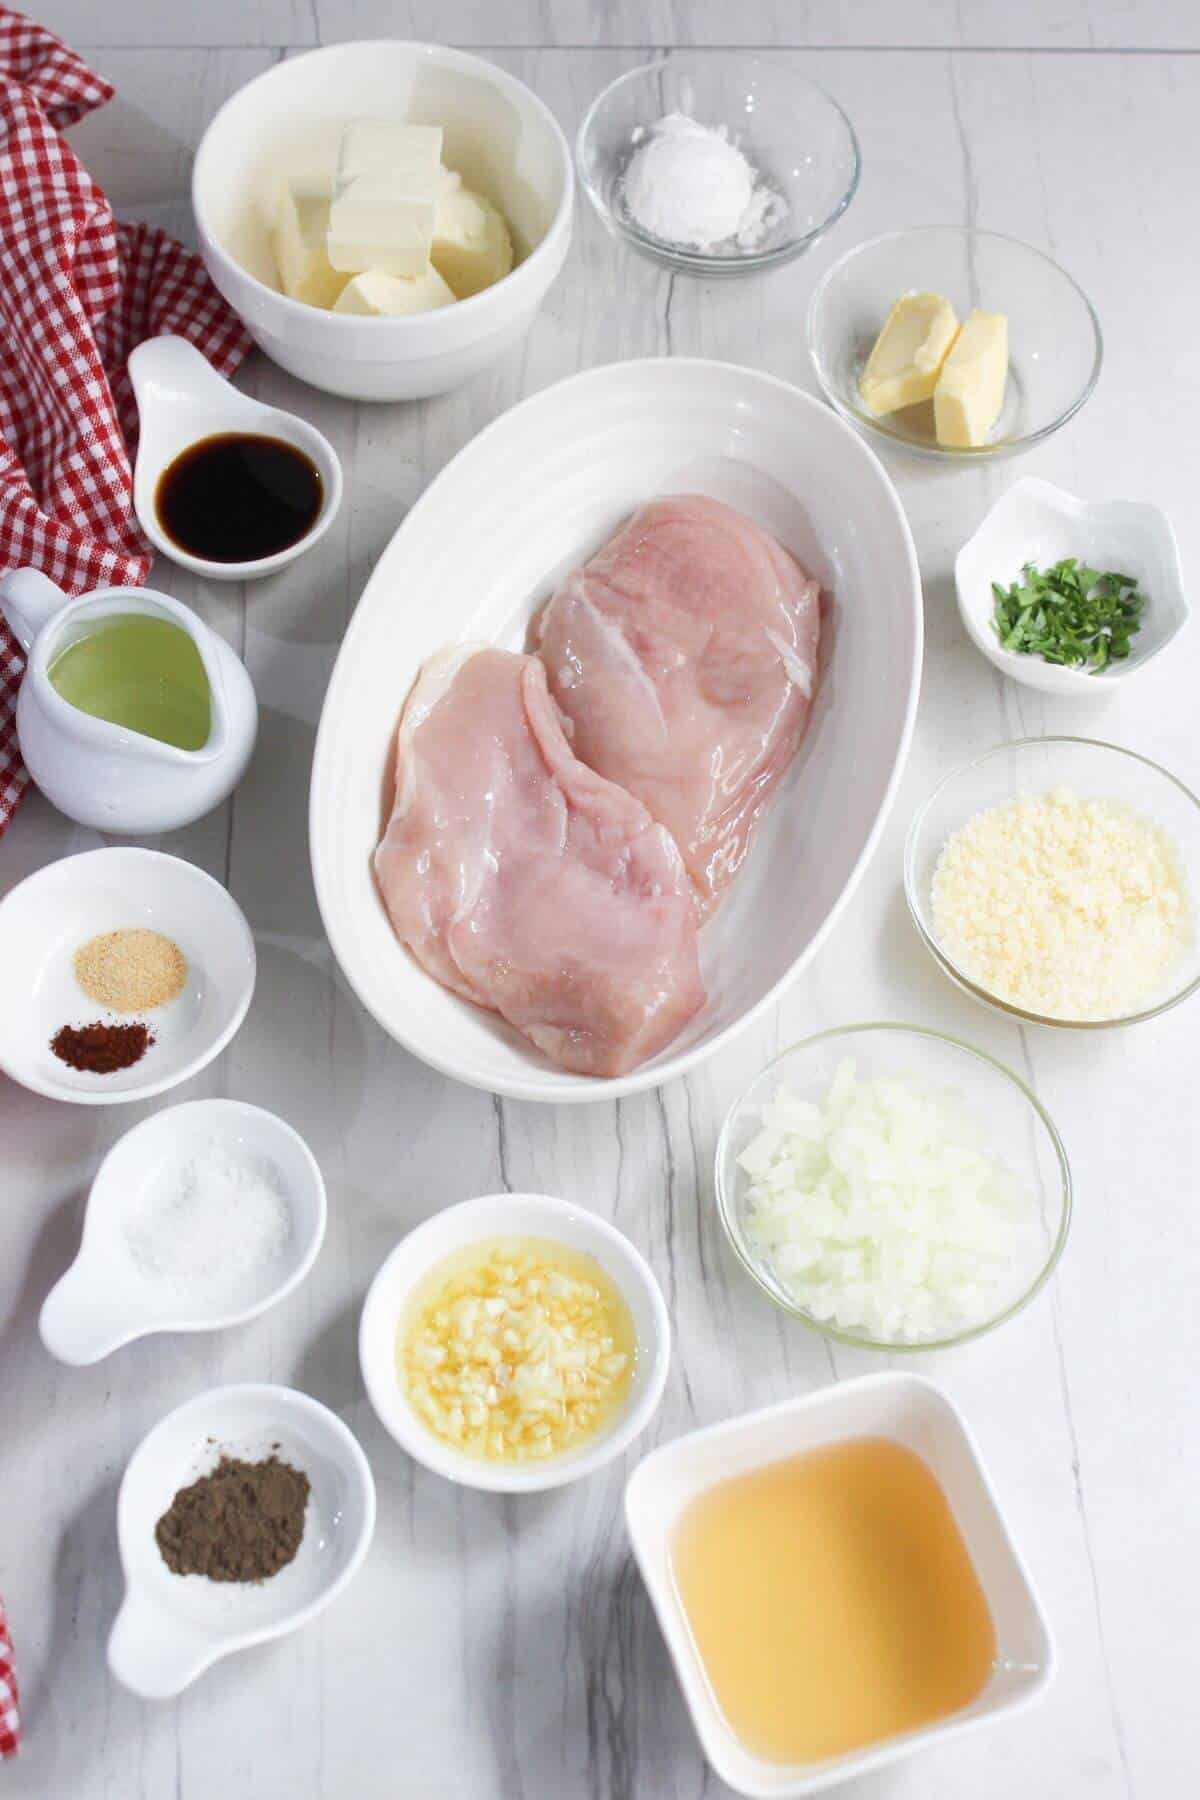 The ingredients for a chicken dish are laid out on a table.